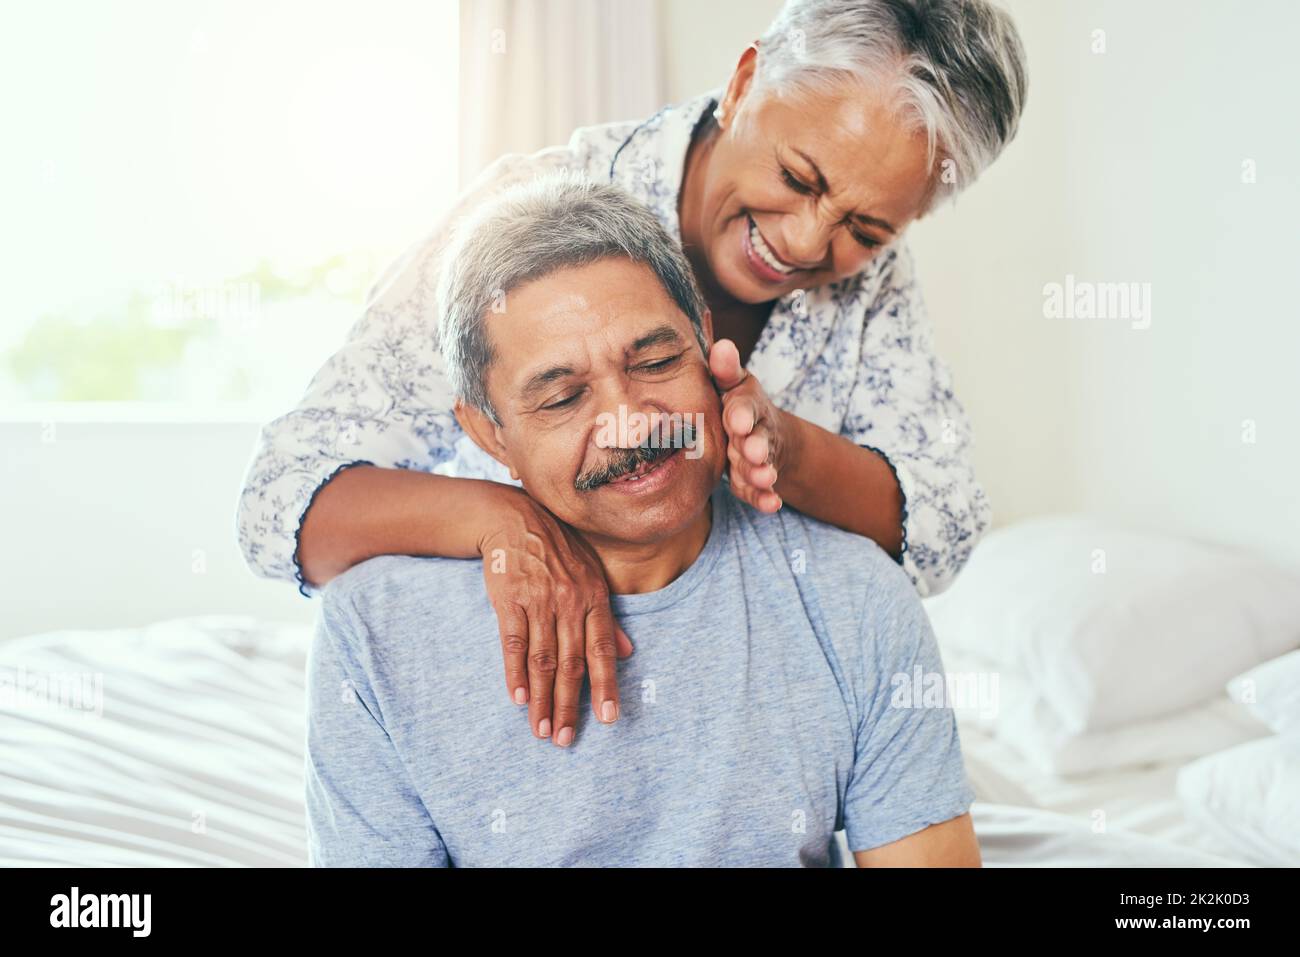 Wow Im getting spoiled today. Shot of a cheerful mature couple holding each other while being seated on a bed at home during the day. Stock Photo